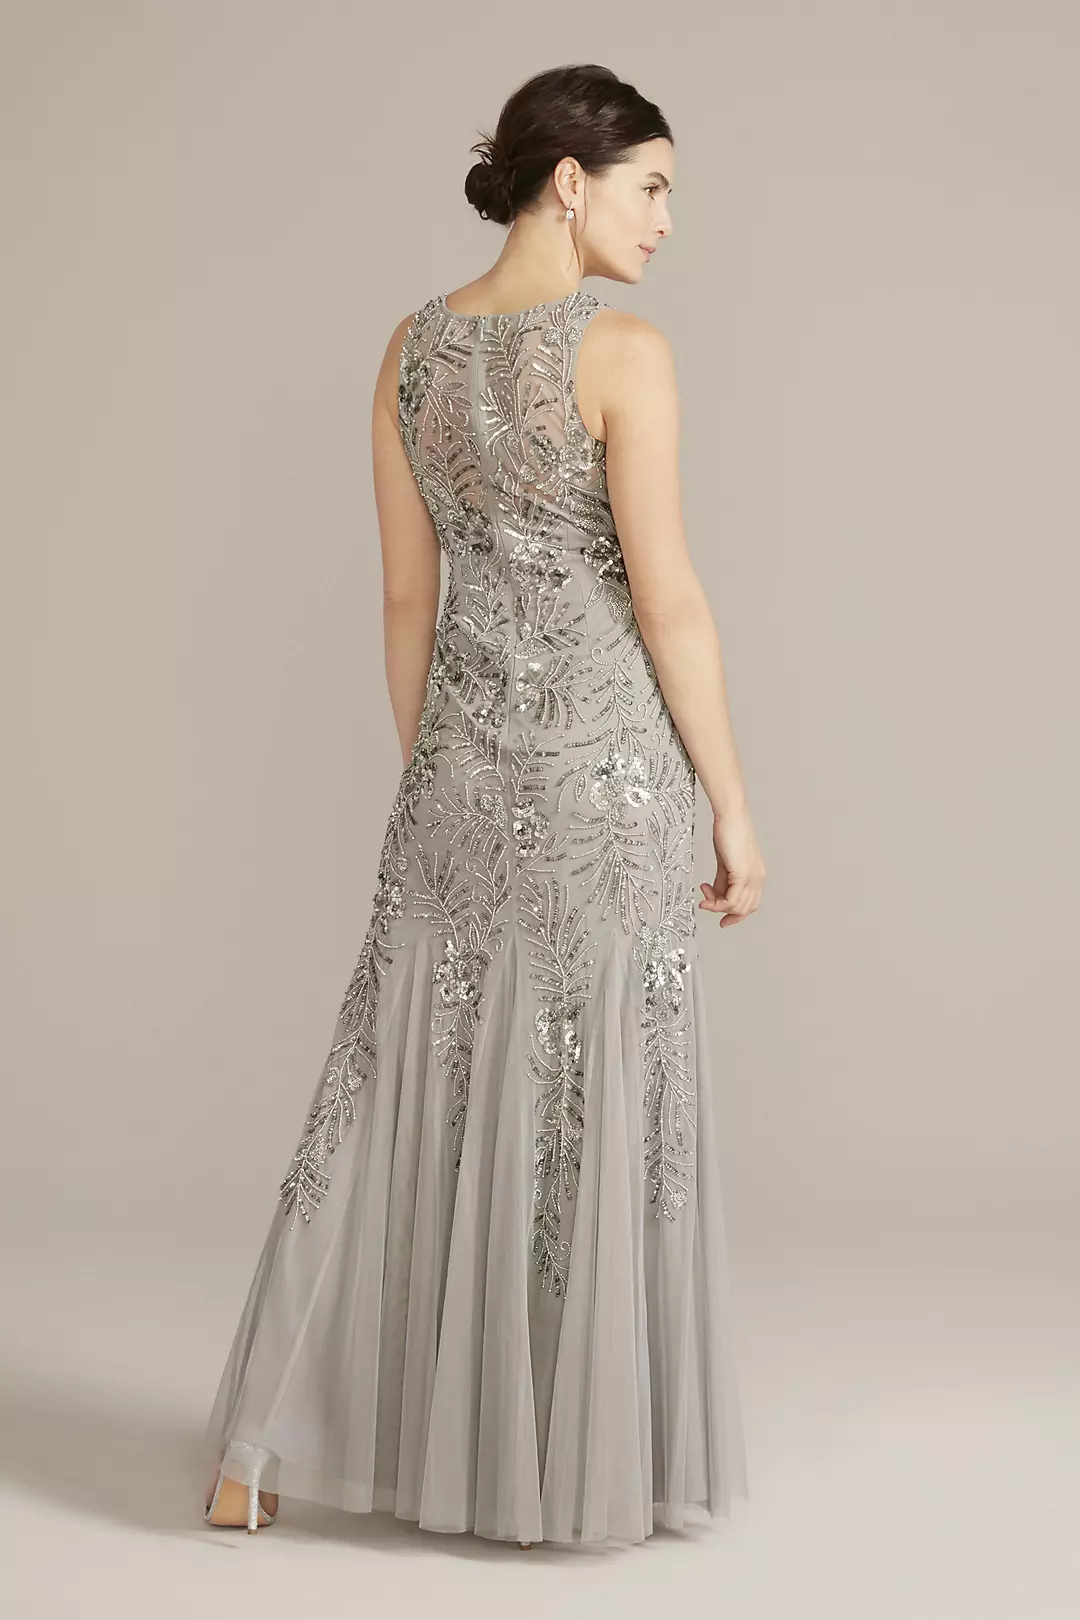 Beaded Sheath Tank Gown with Godets Image 2